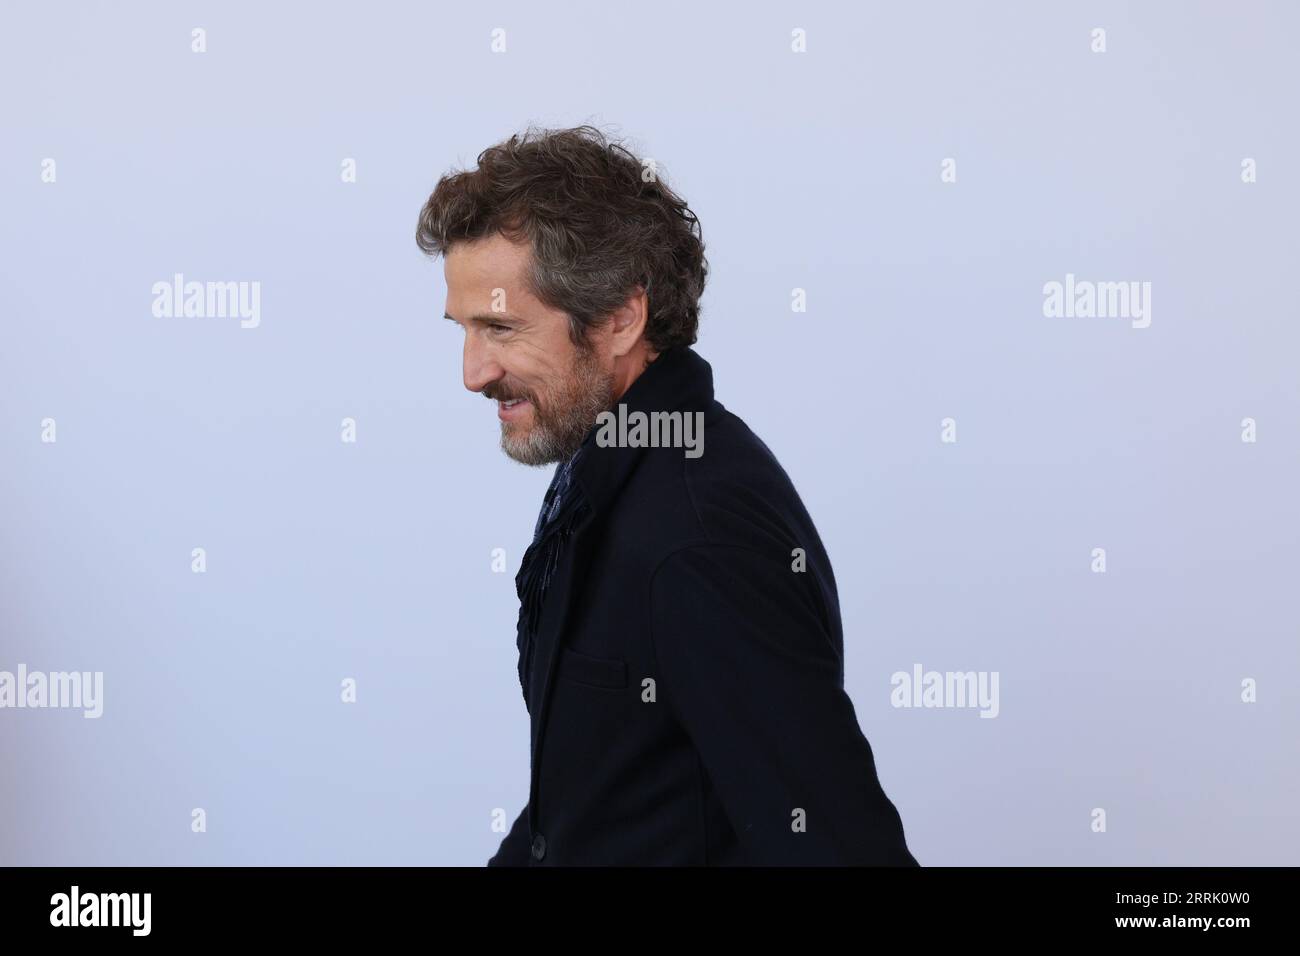 GUILLAUME CANET DIANE KRUGER LOS ANGELES USA 02 February 2000 Stock Photo -  Alamy